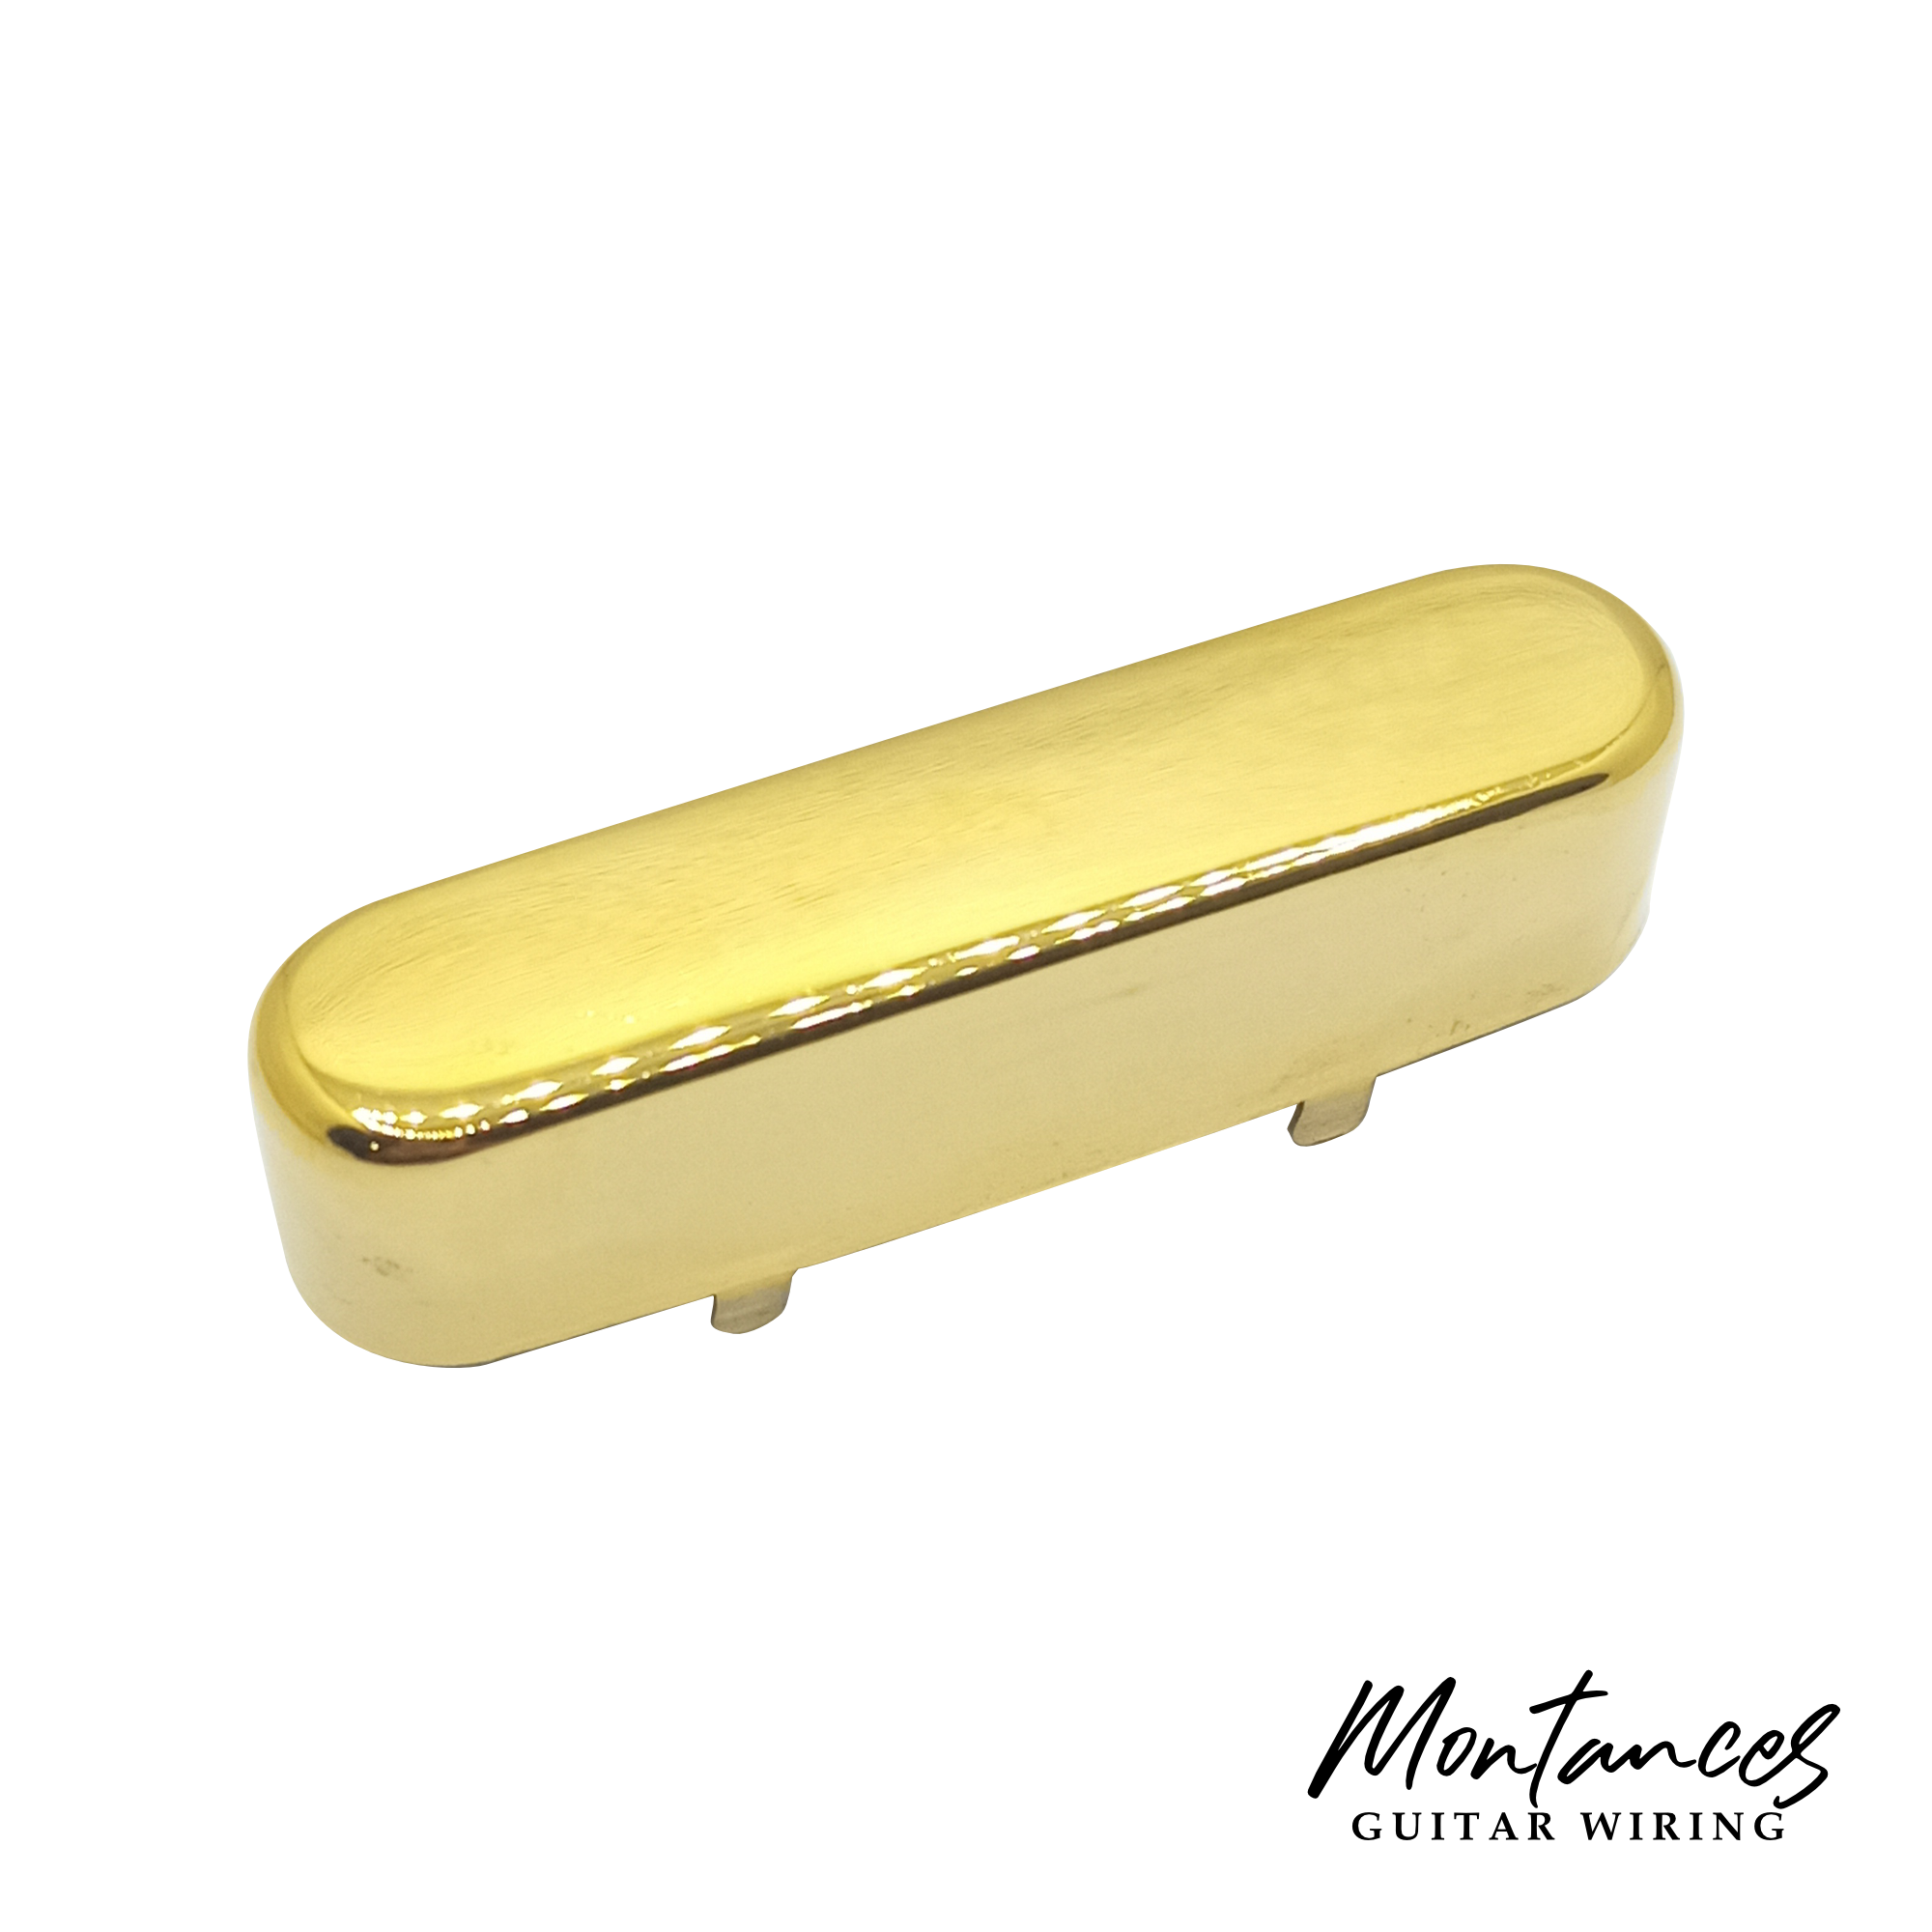 Telecaster Neck Pickup Cover Nickel Silver Material